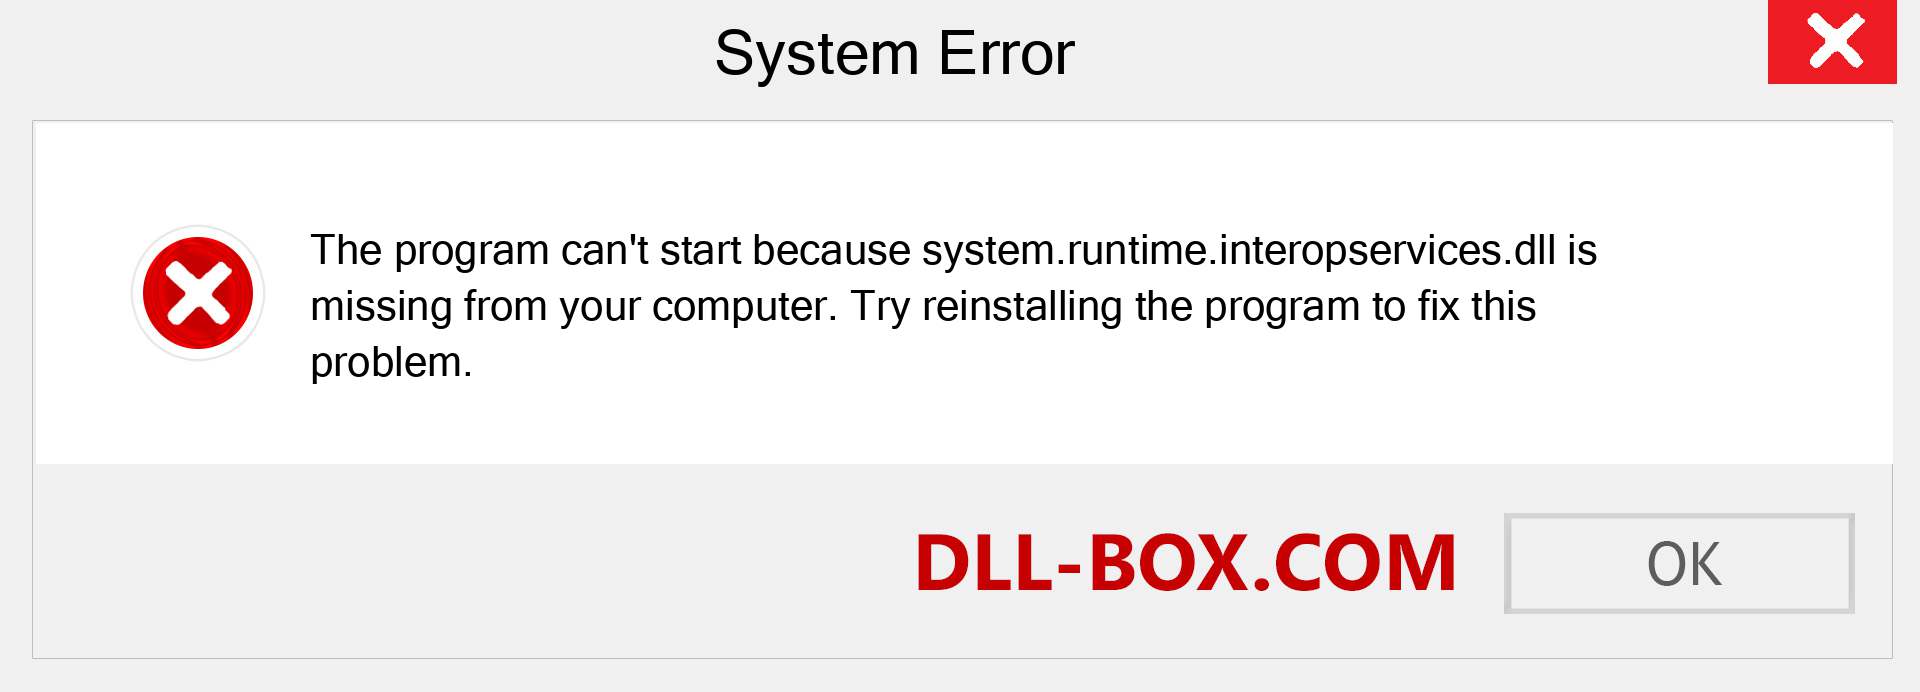  system.runtime.interopservices.dll file is missing?. Download for Windows 7, 8, 10 - Fix  system.runtime.interopservices dll Missing Error on Windows, photos, images